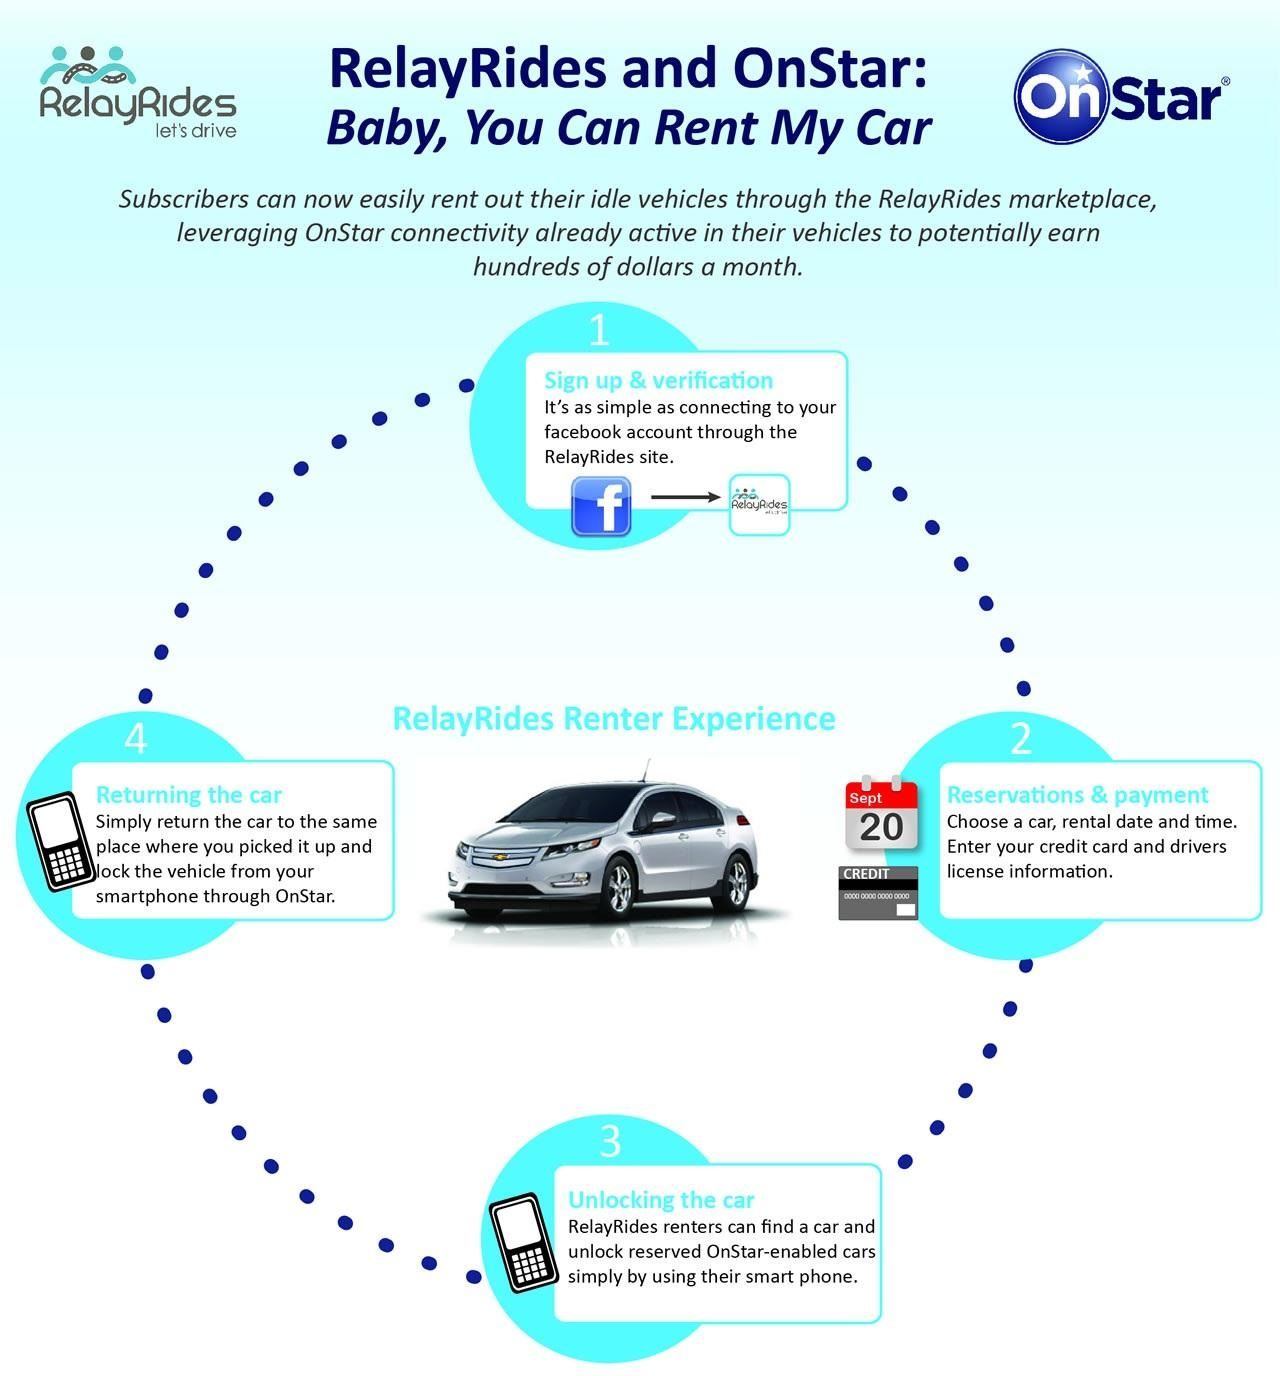 Pay Off Your Car in Half the Time by Renting It Out with OnStar